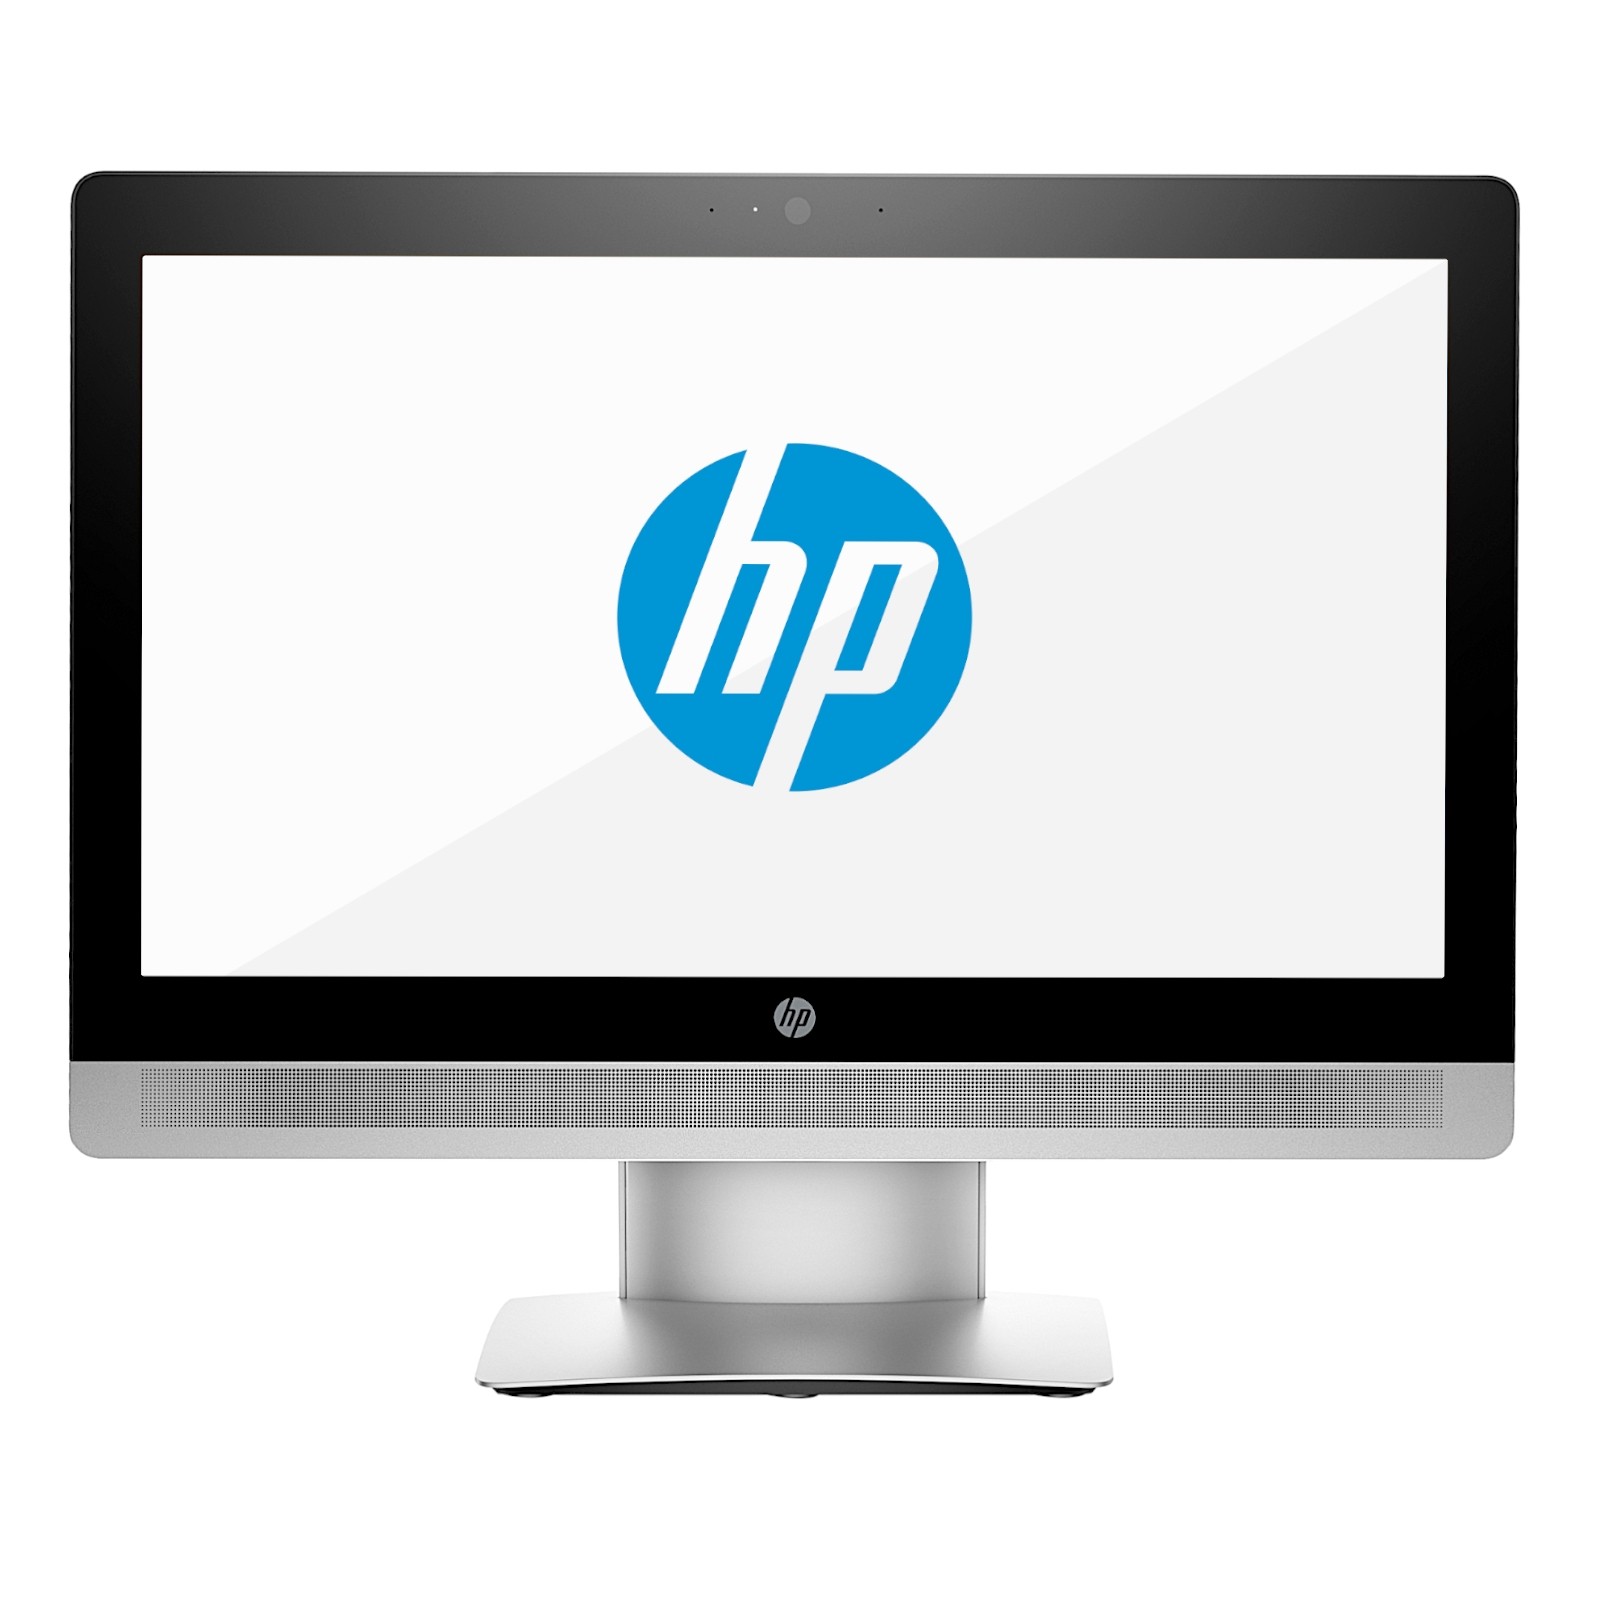 HP ProOne 600 G2 21.5" All-in-One (AiO) Desktop PC Front